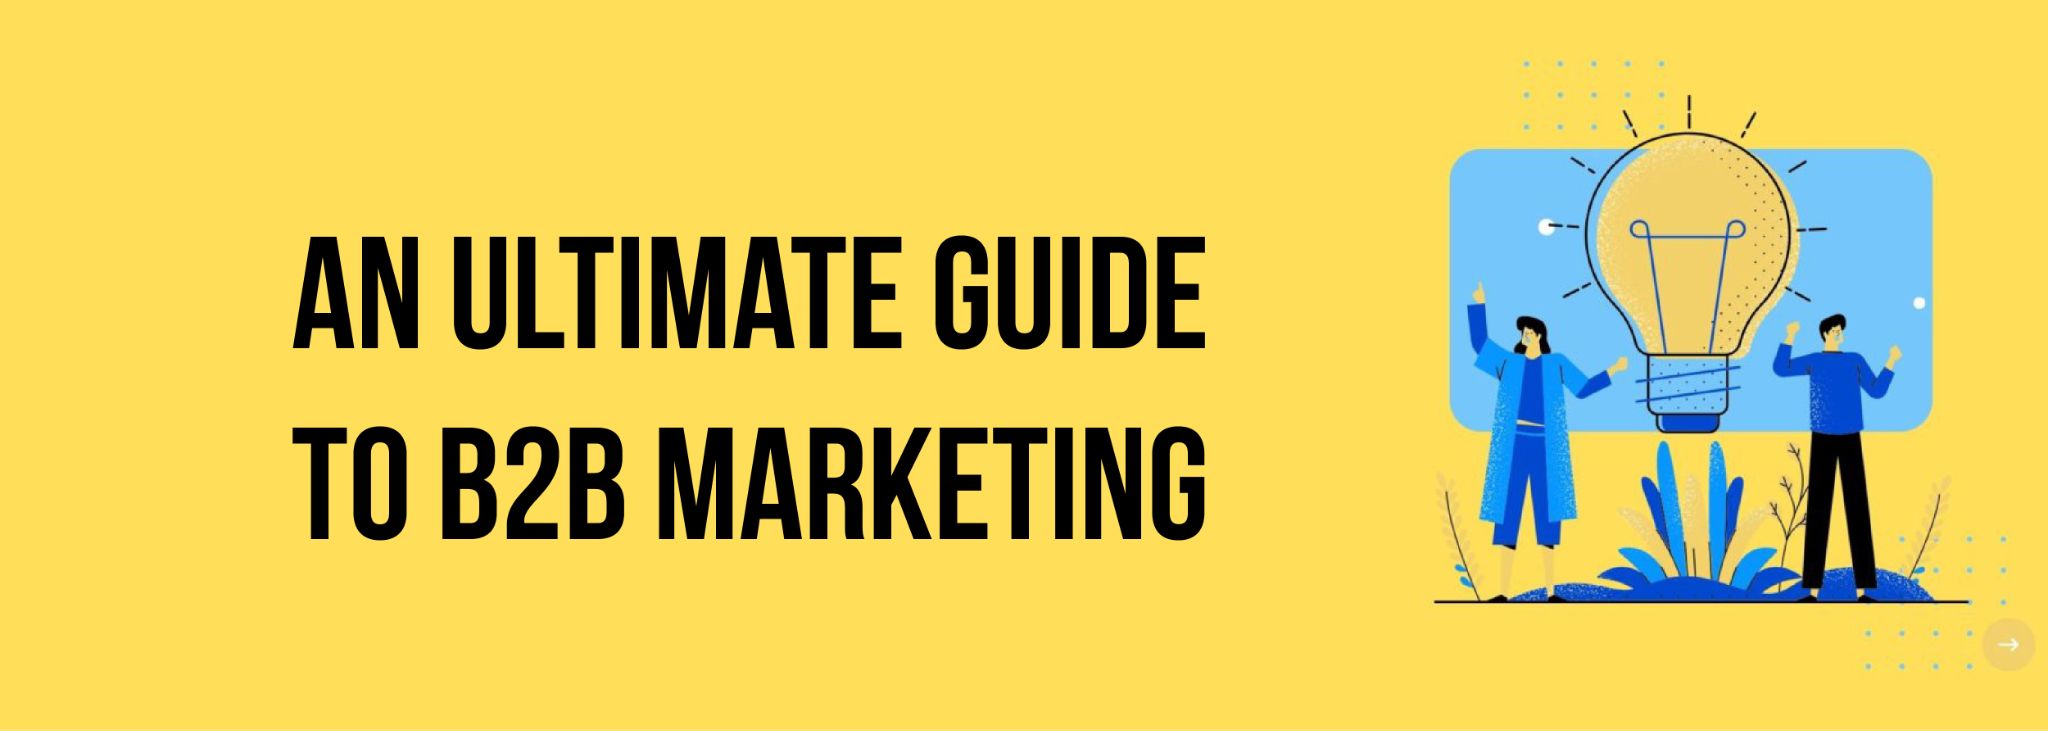 An ultimate guide to B2B marketing